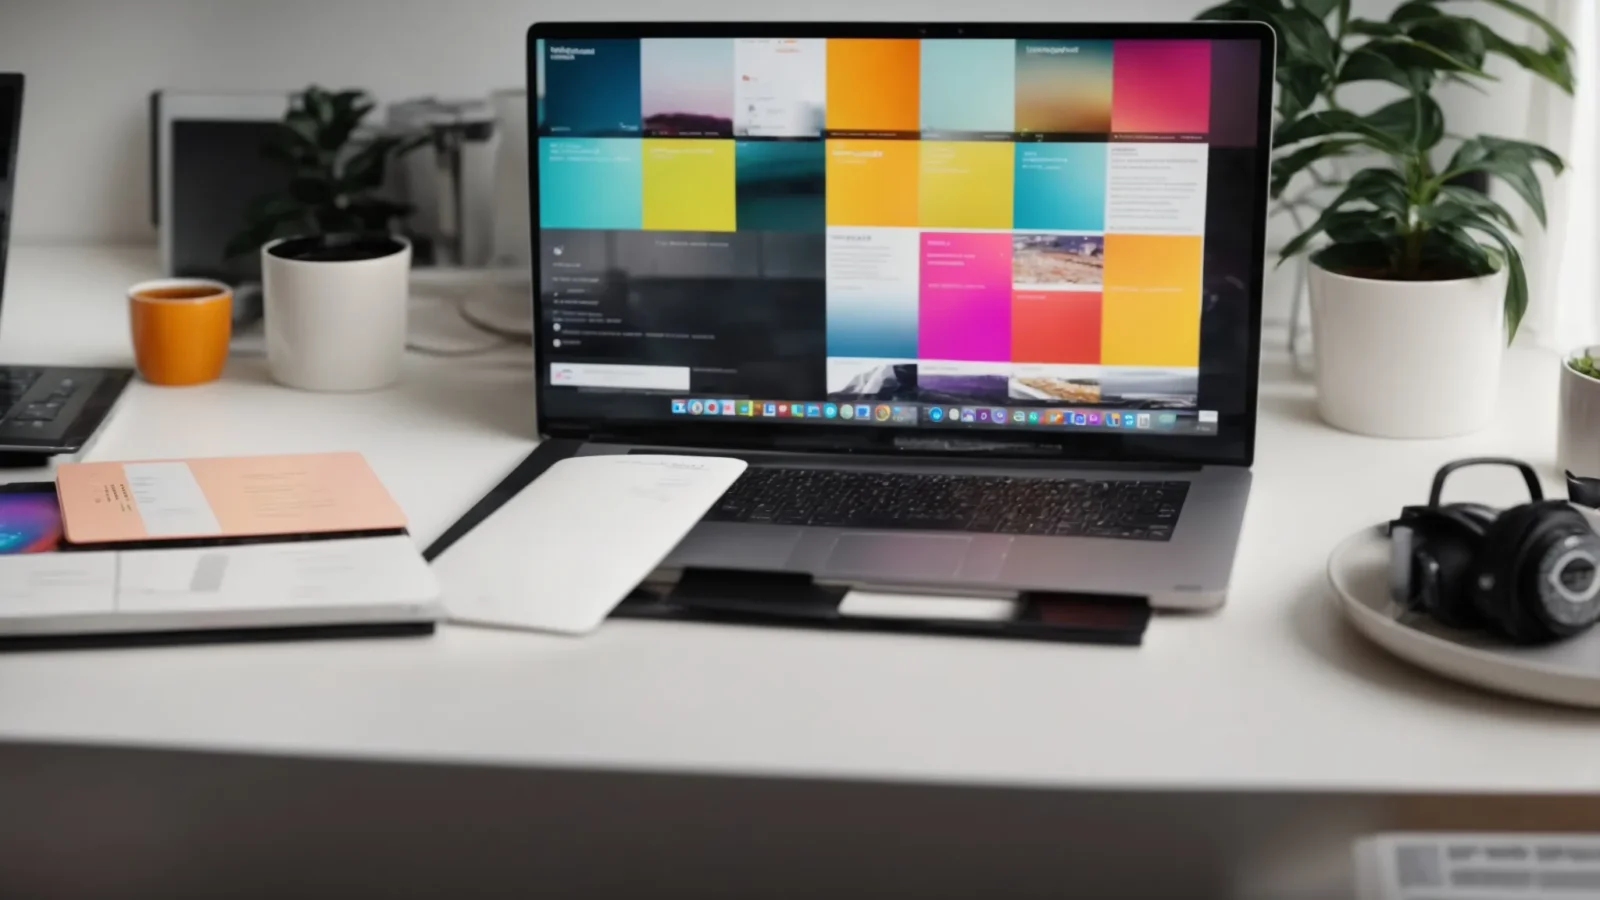 a laptop displaying a colorful, organized website layout sits on a sleek, modern desk.